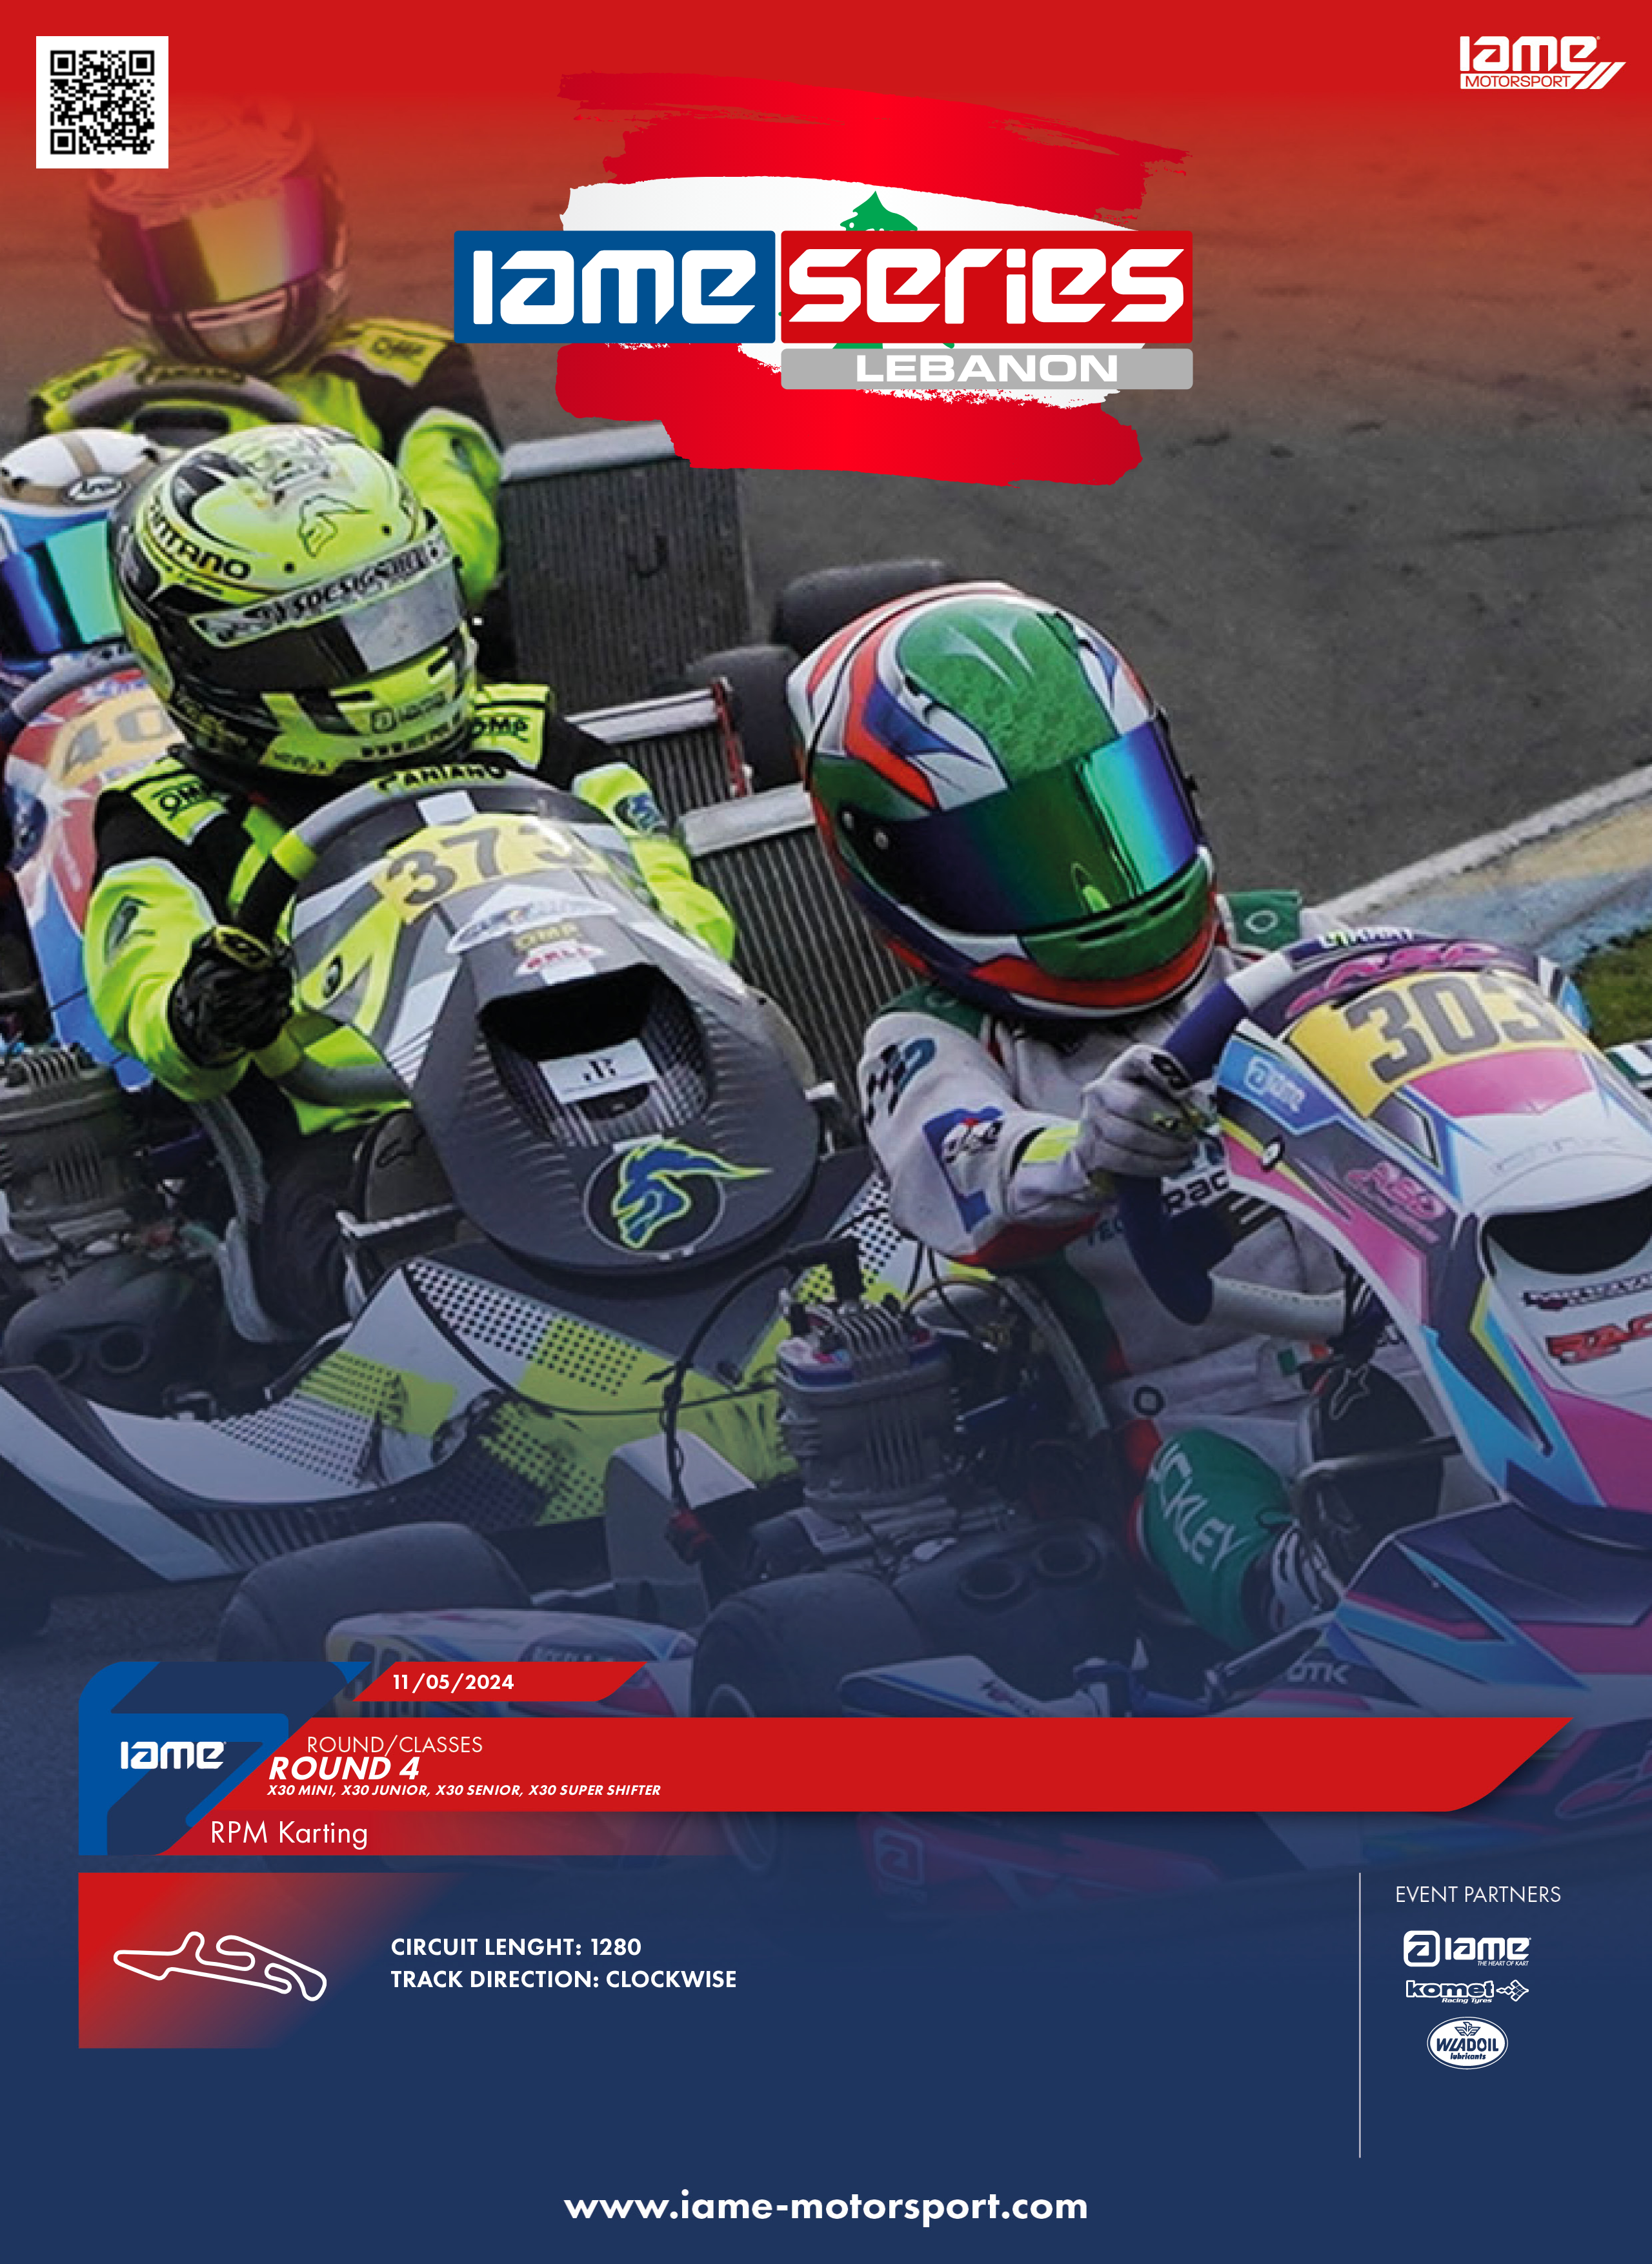 Get Ready for an Unforgettable Karting Experience at the IAME Series Lebanon, Round 4!